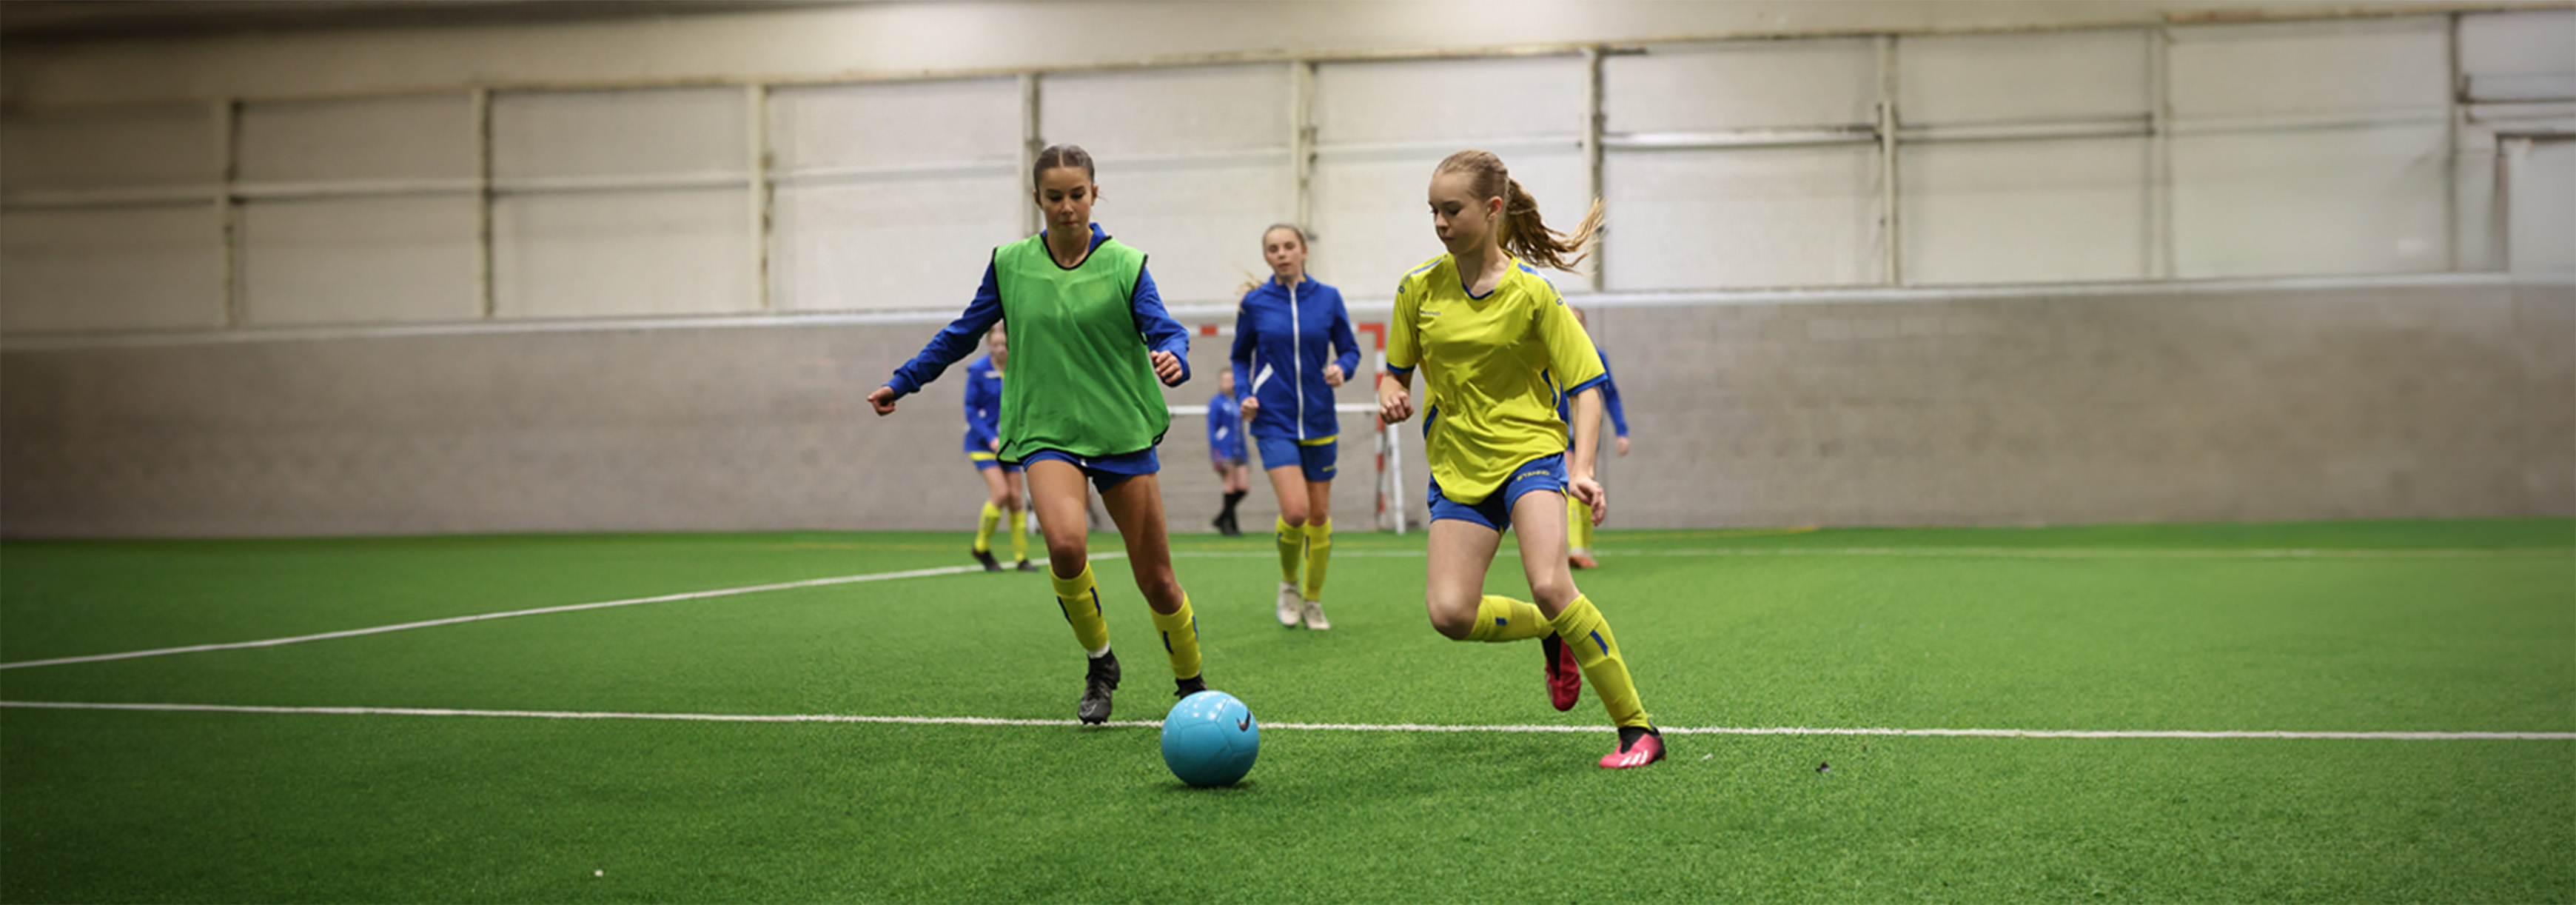 A girl in a yellow and blue kit runs with the ball under pressure from a green bibbed opponent to her right.